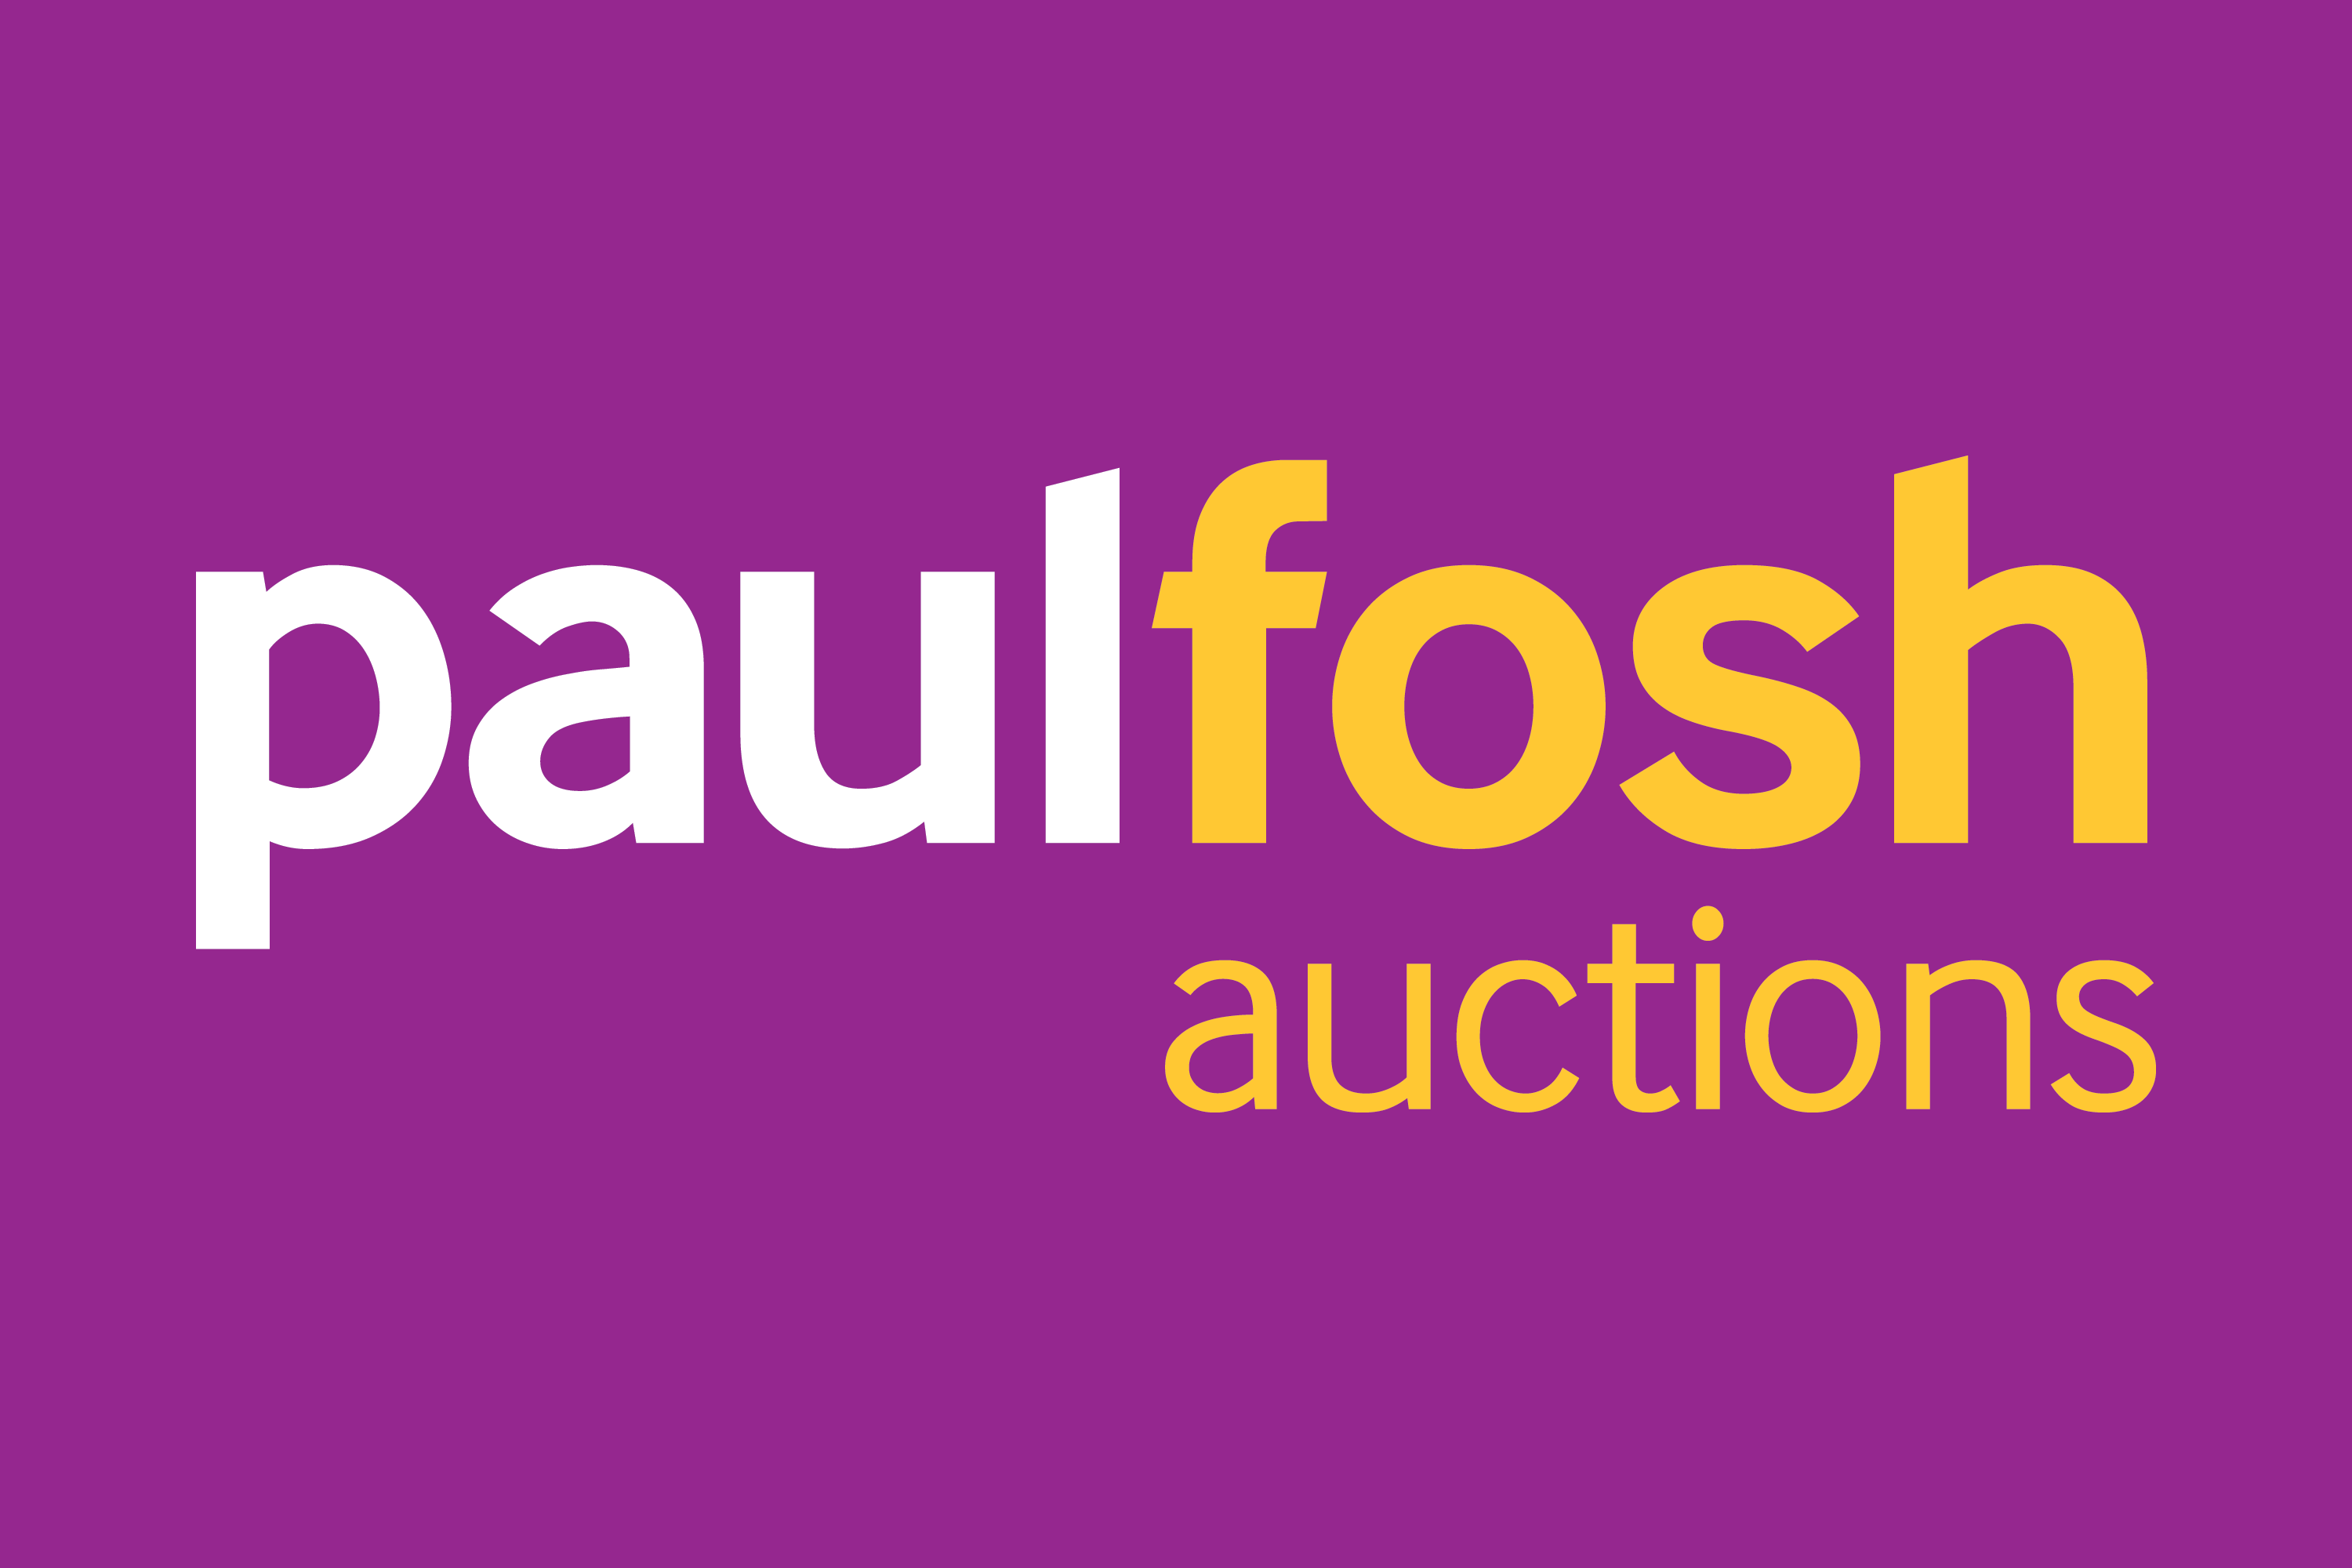 Please contact Paul Fosh Auctions on 01633 254044.